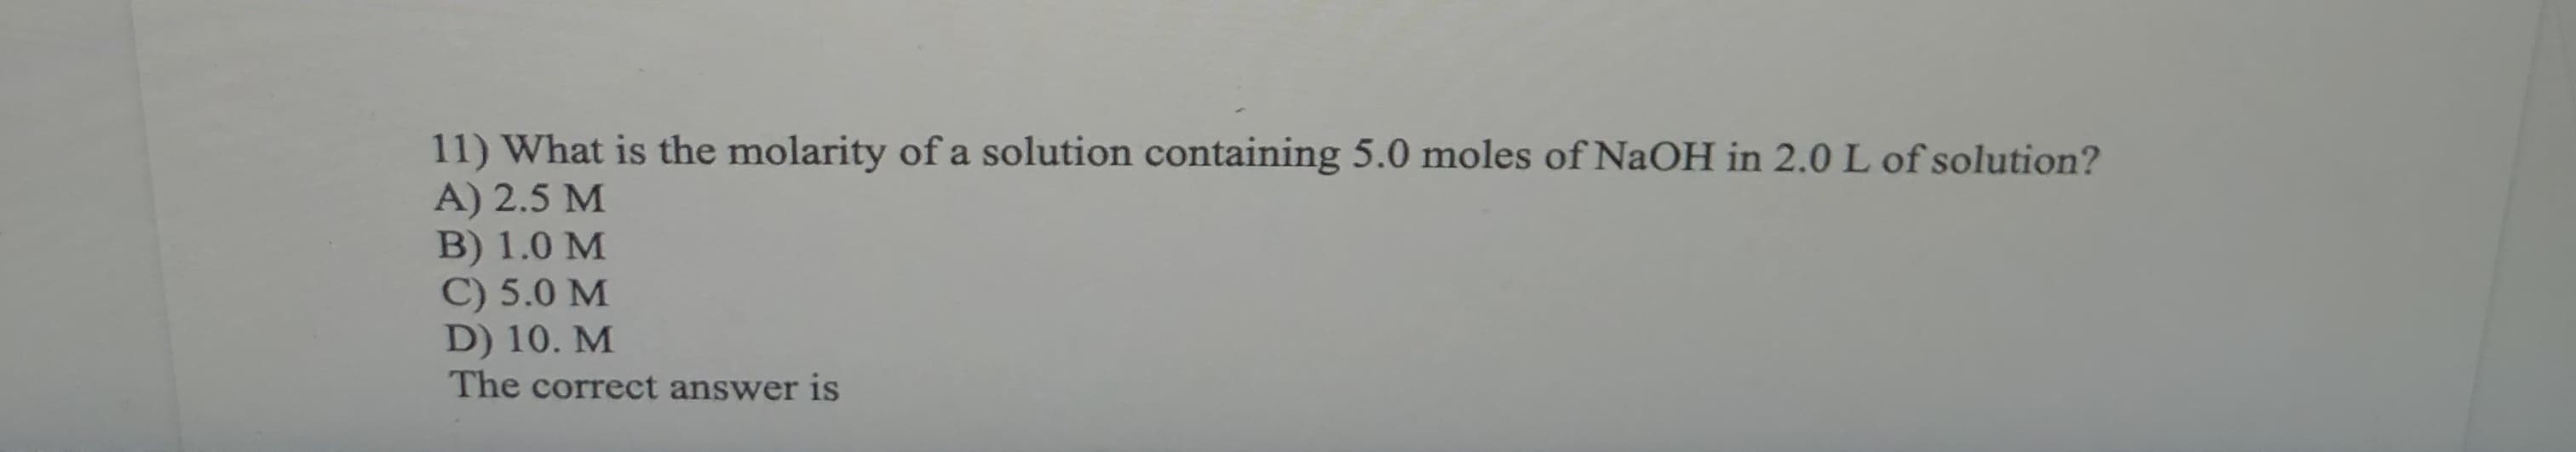 11) What is the molarity of a solution containing 5.0 moles of NaOH in 2.0 L of solution?
A) 2.5 M
1.0 M
C) 5.0 M
D) 10. M
The correct answer is
